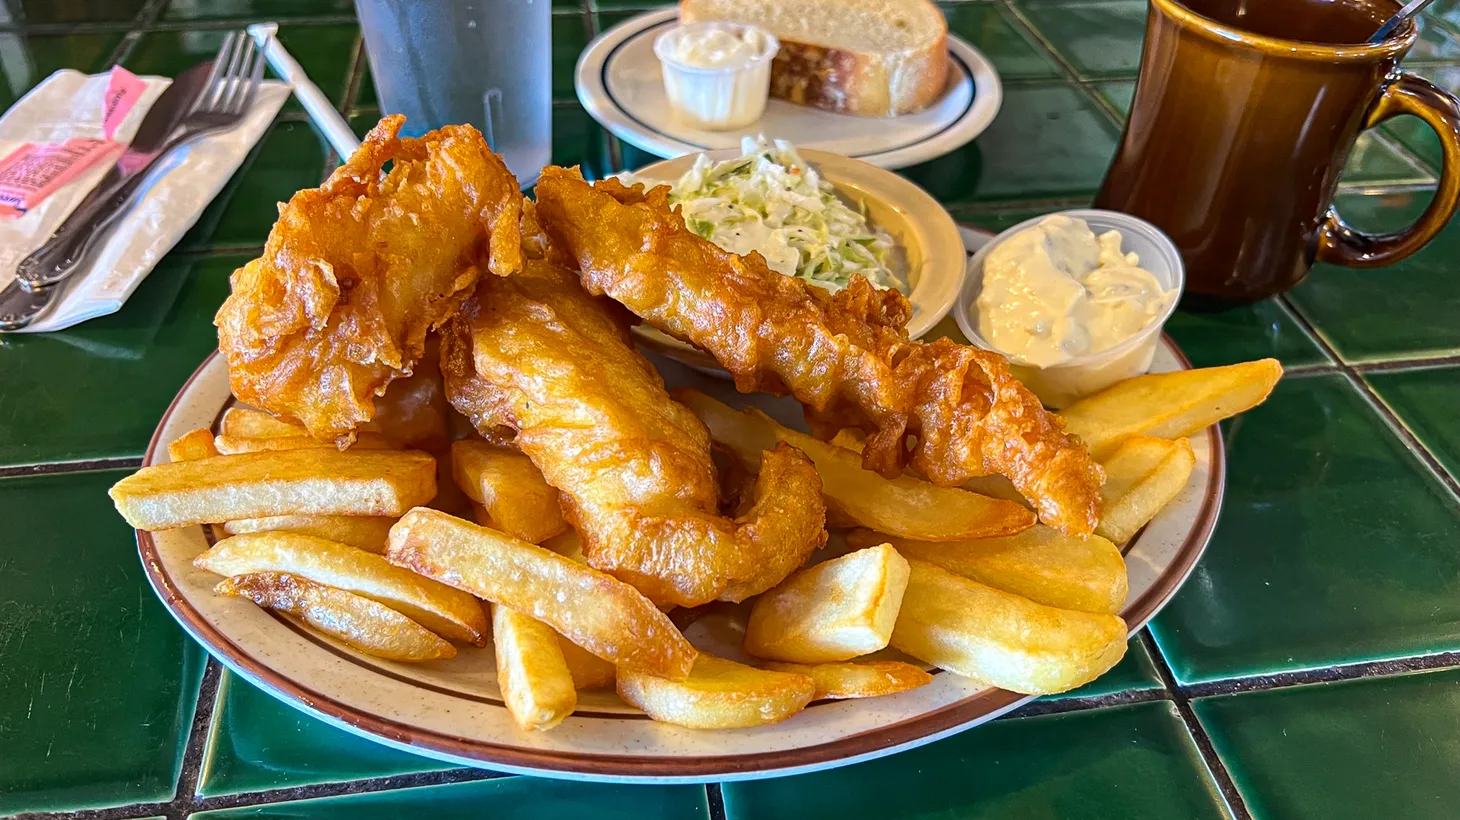 The fish and chips at Teddy's Cafe remind Memo Torres of a spot he visited in Inglewood as a child.